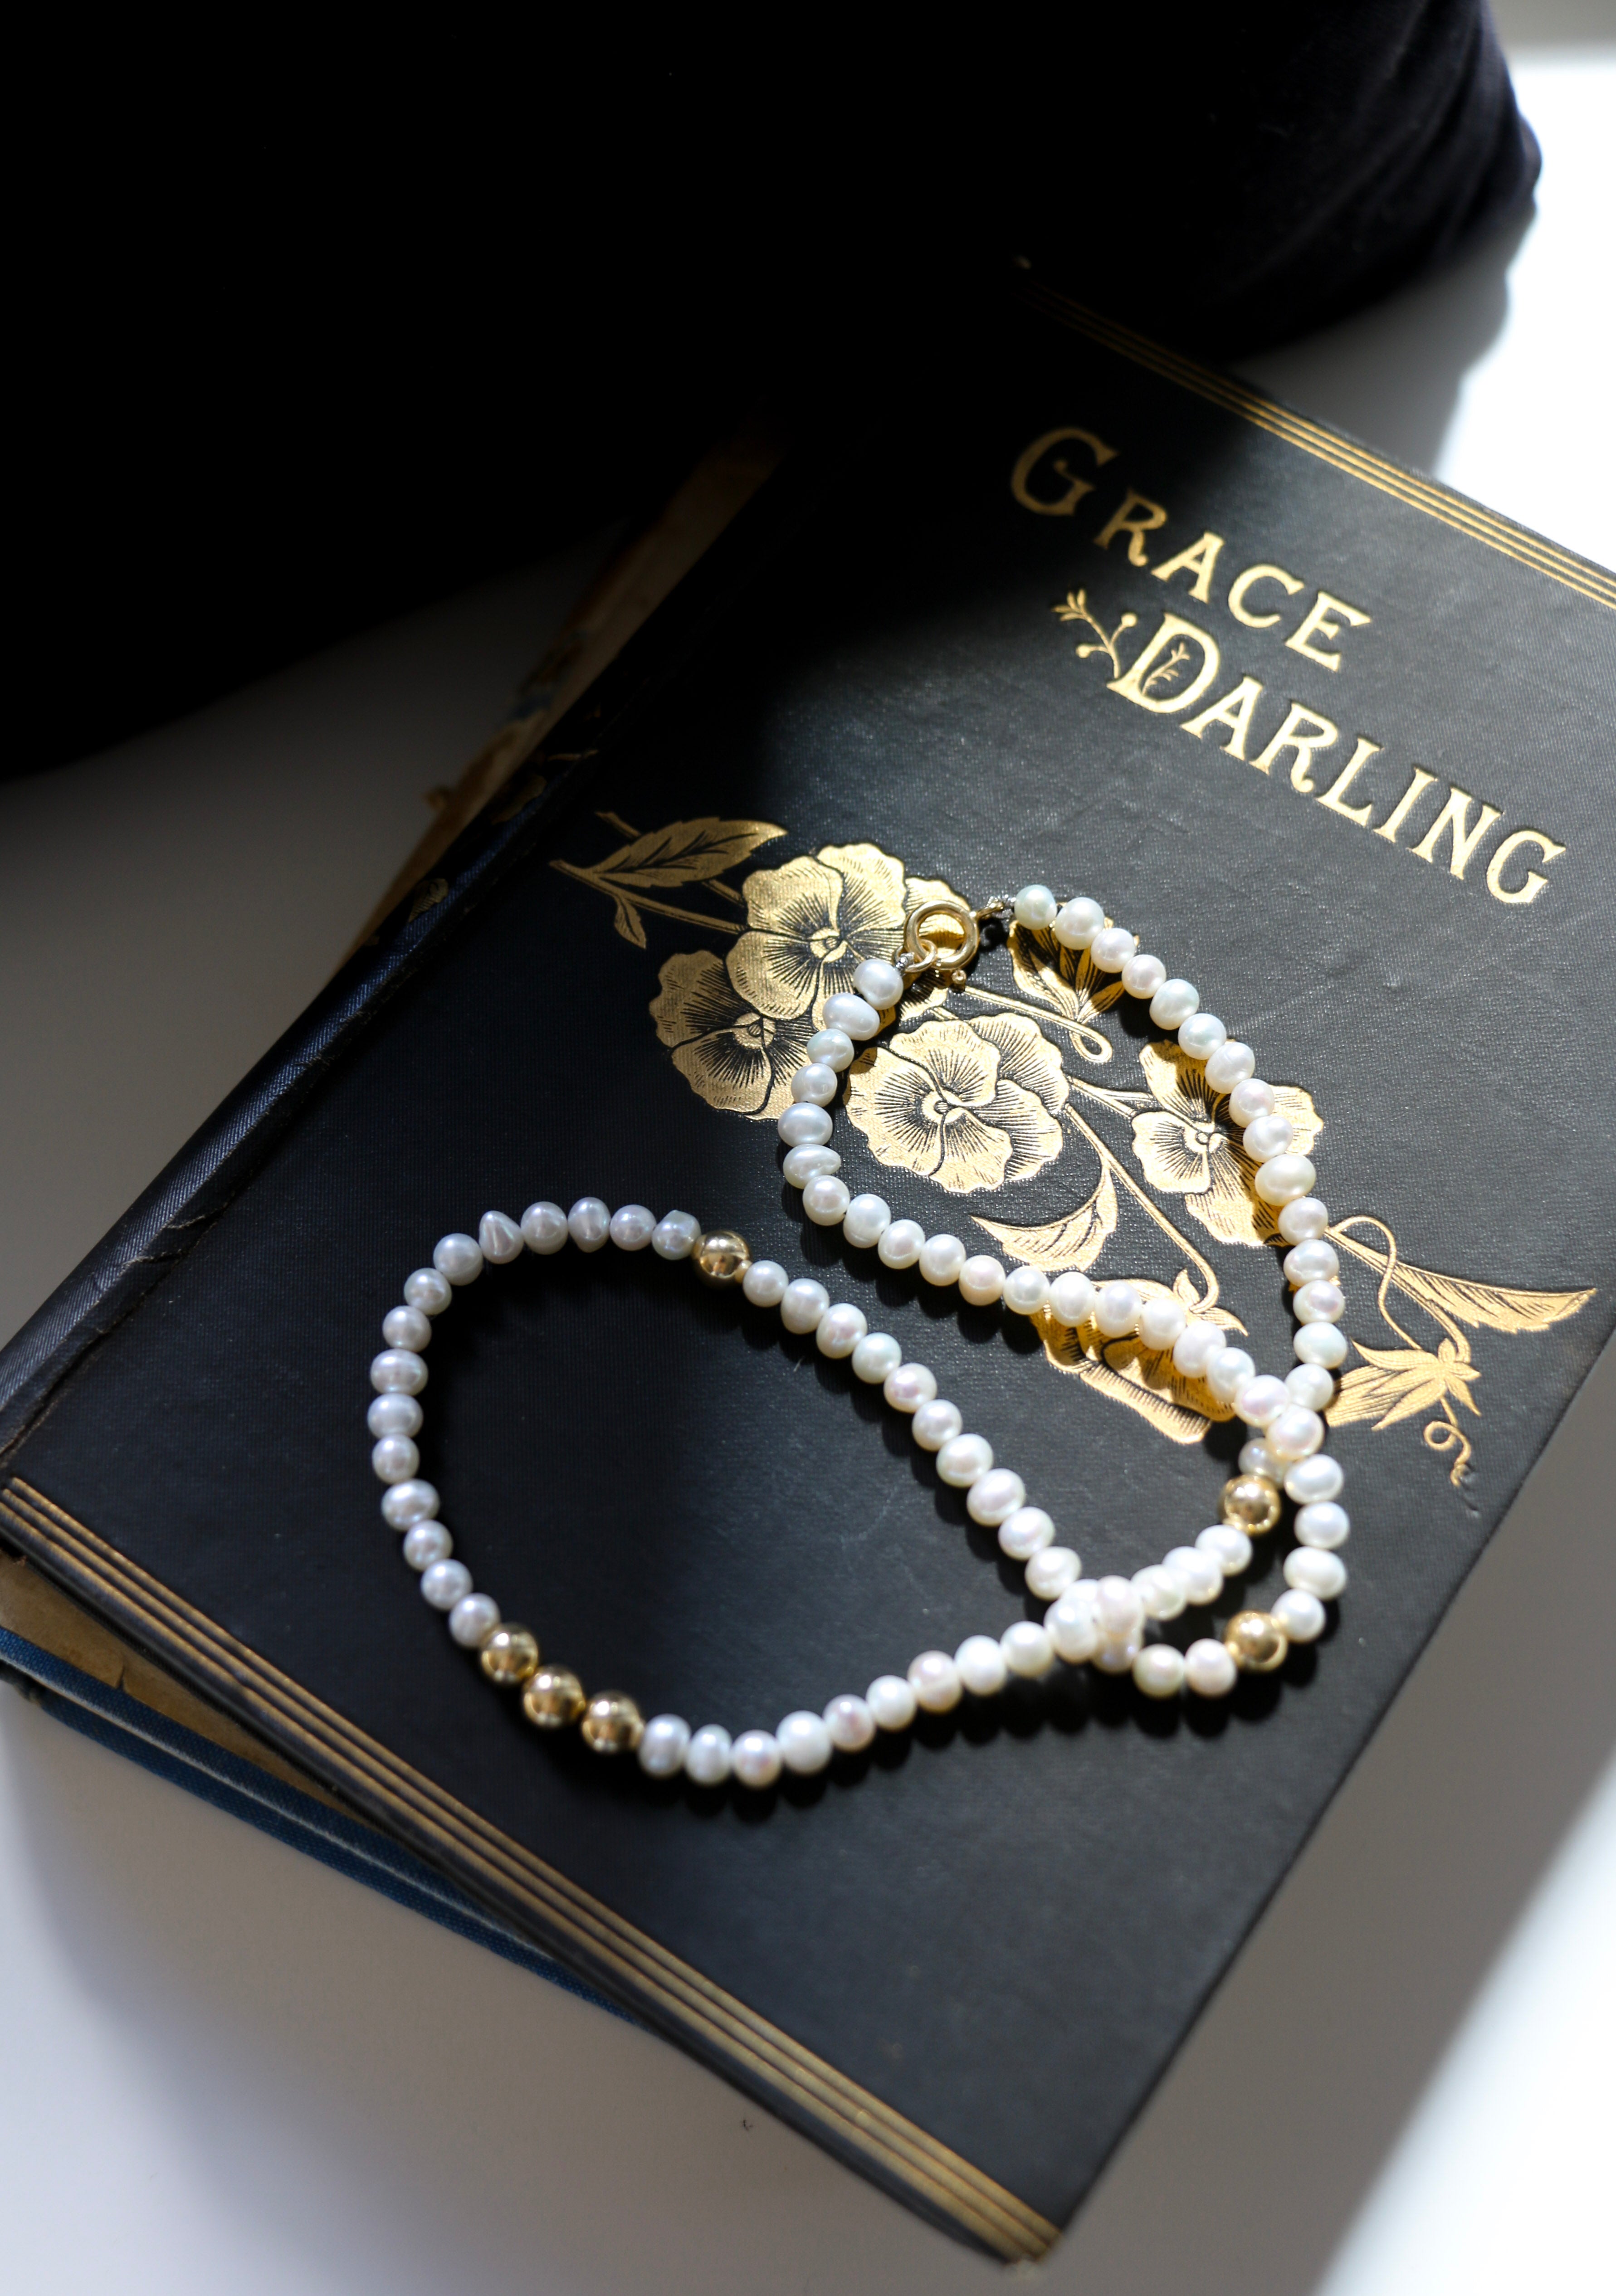 Grace Pearl Necklace lying on a book a out our muse Grace Darling